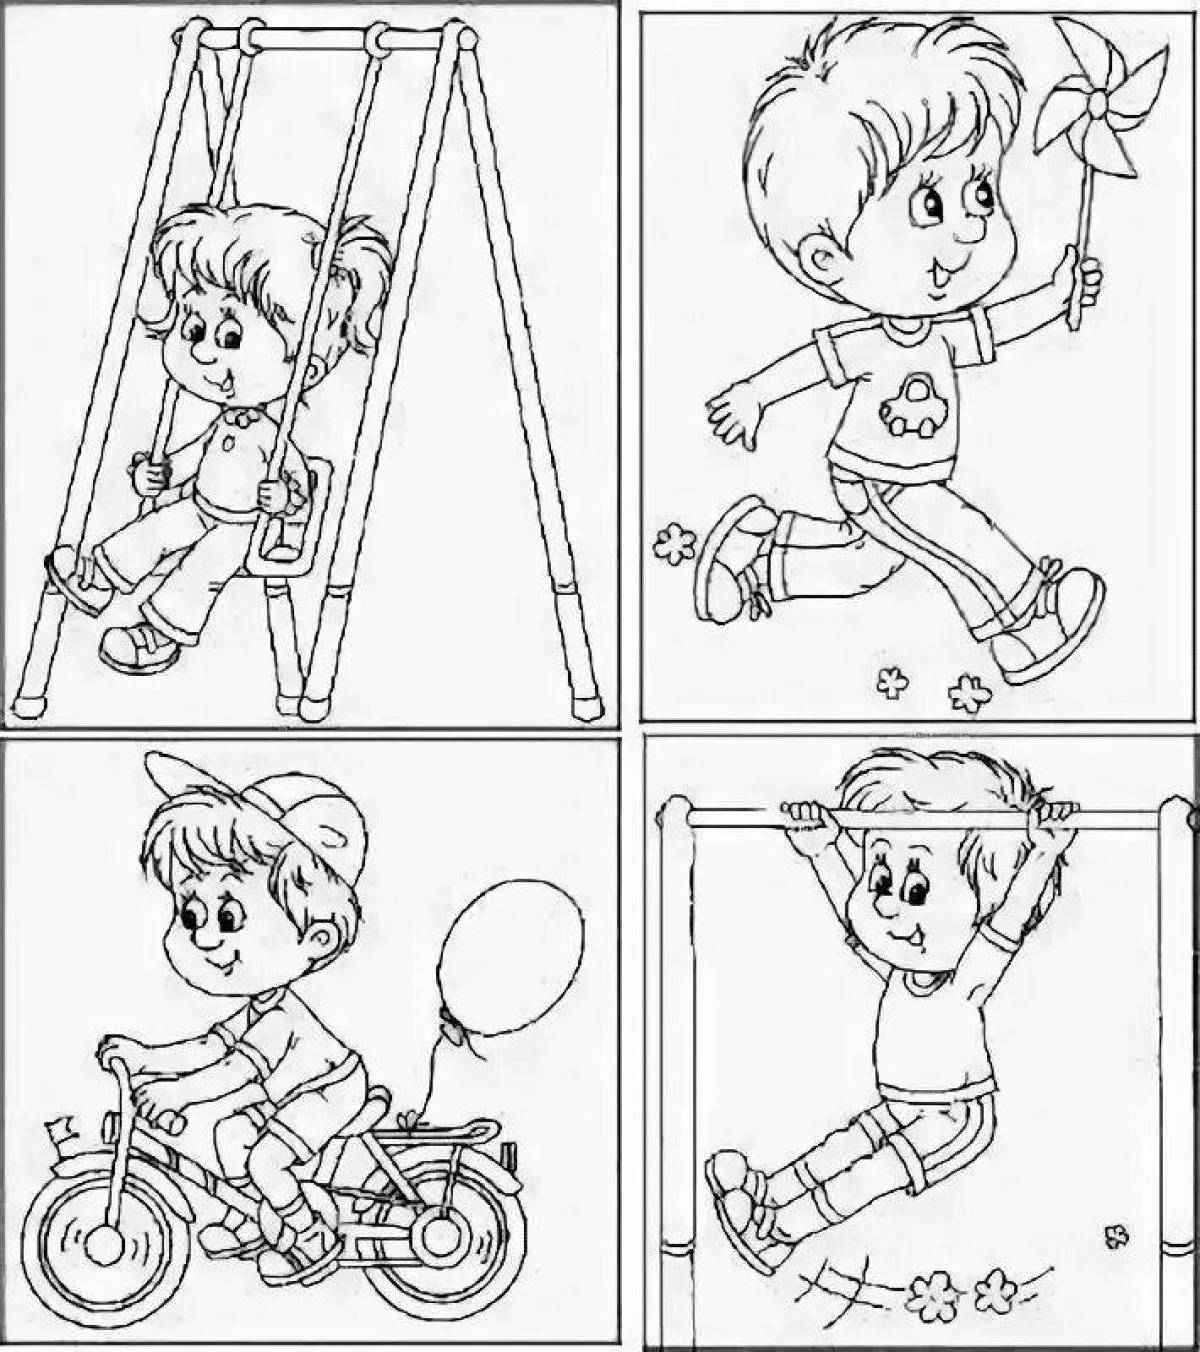 Colorful healthy lifestyle coloring page